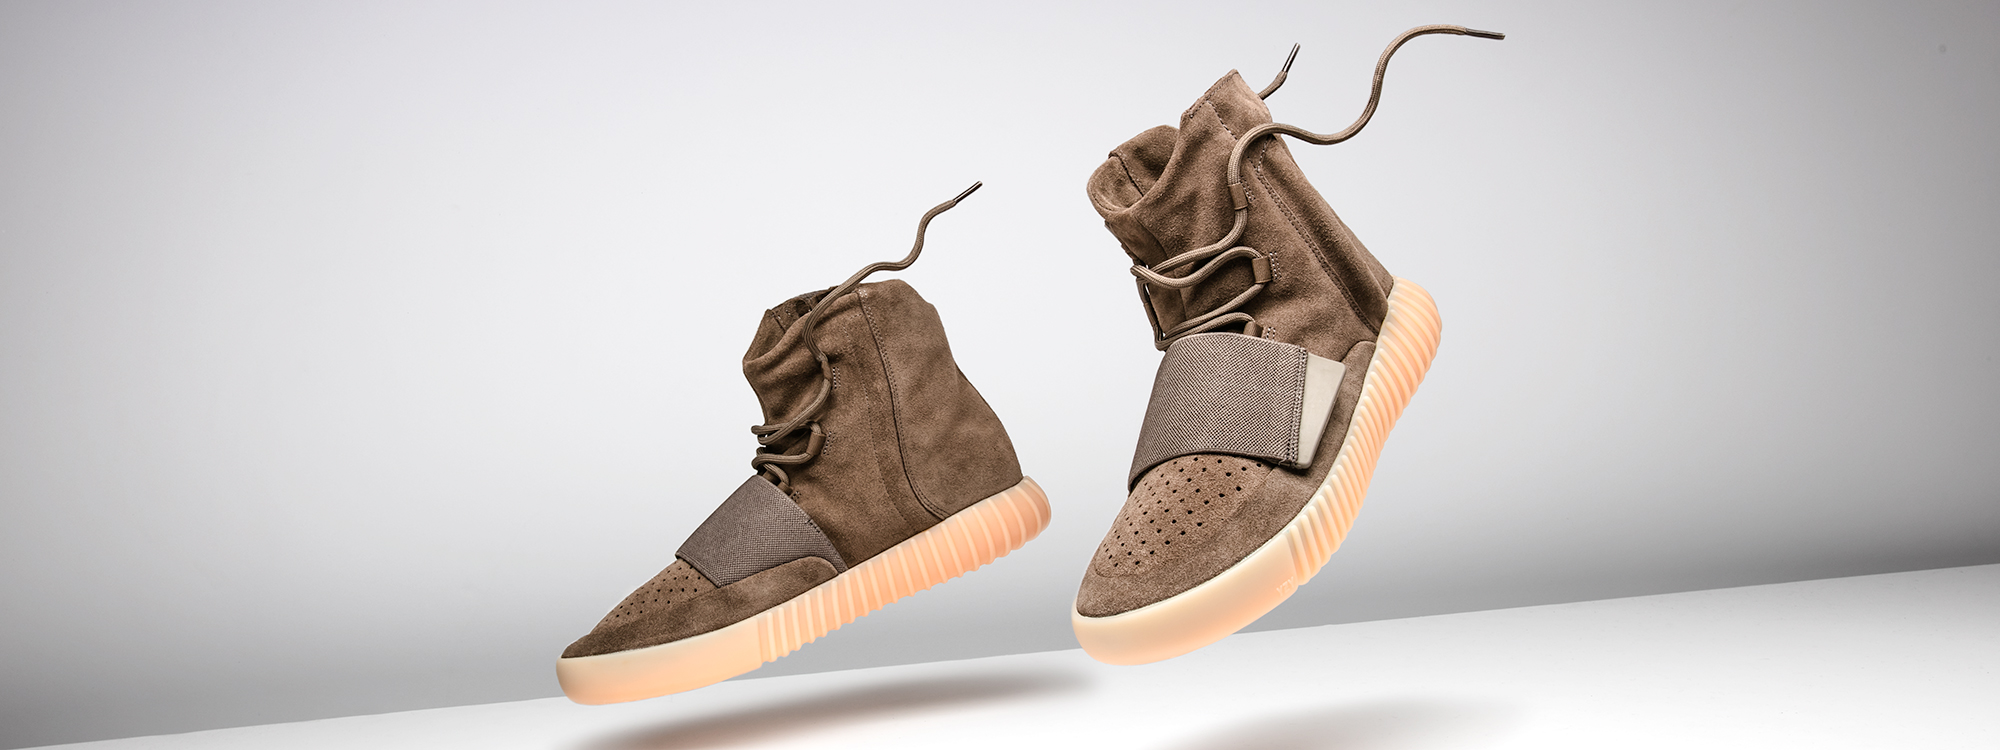 buy real  Yeezy Boost 750  Light Brown / Chocolate for 265 USD only